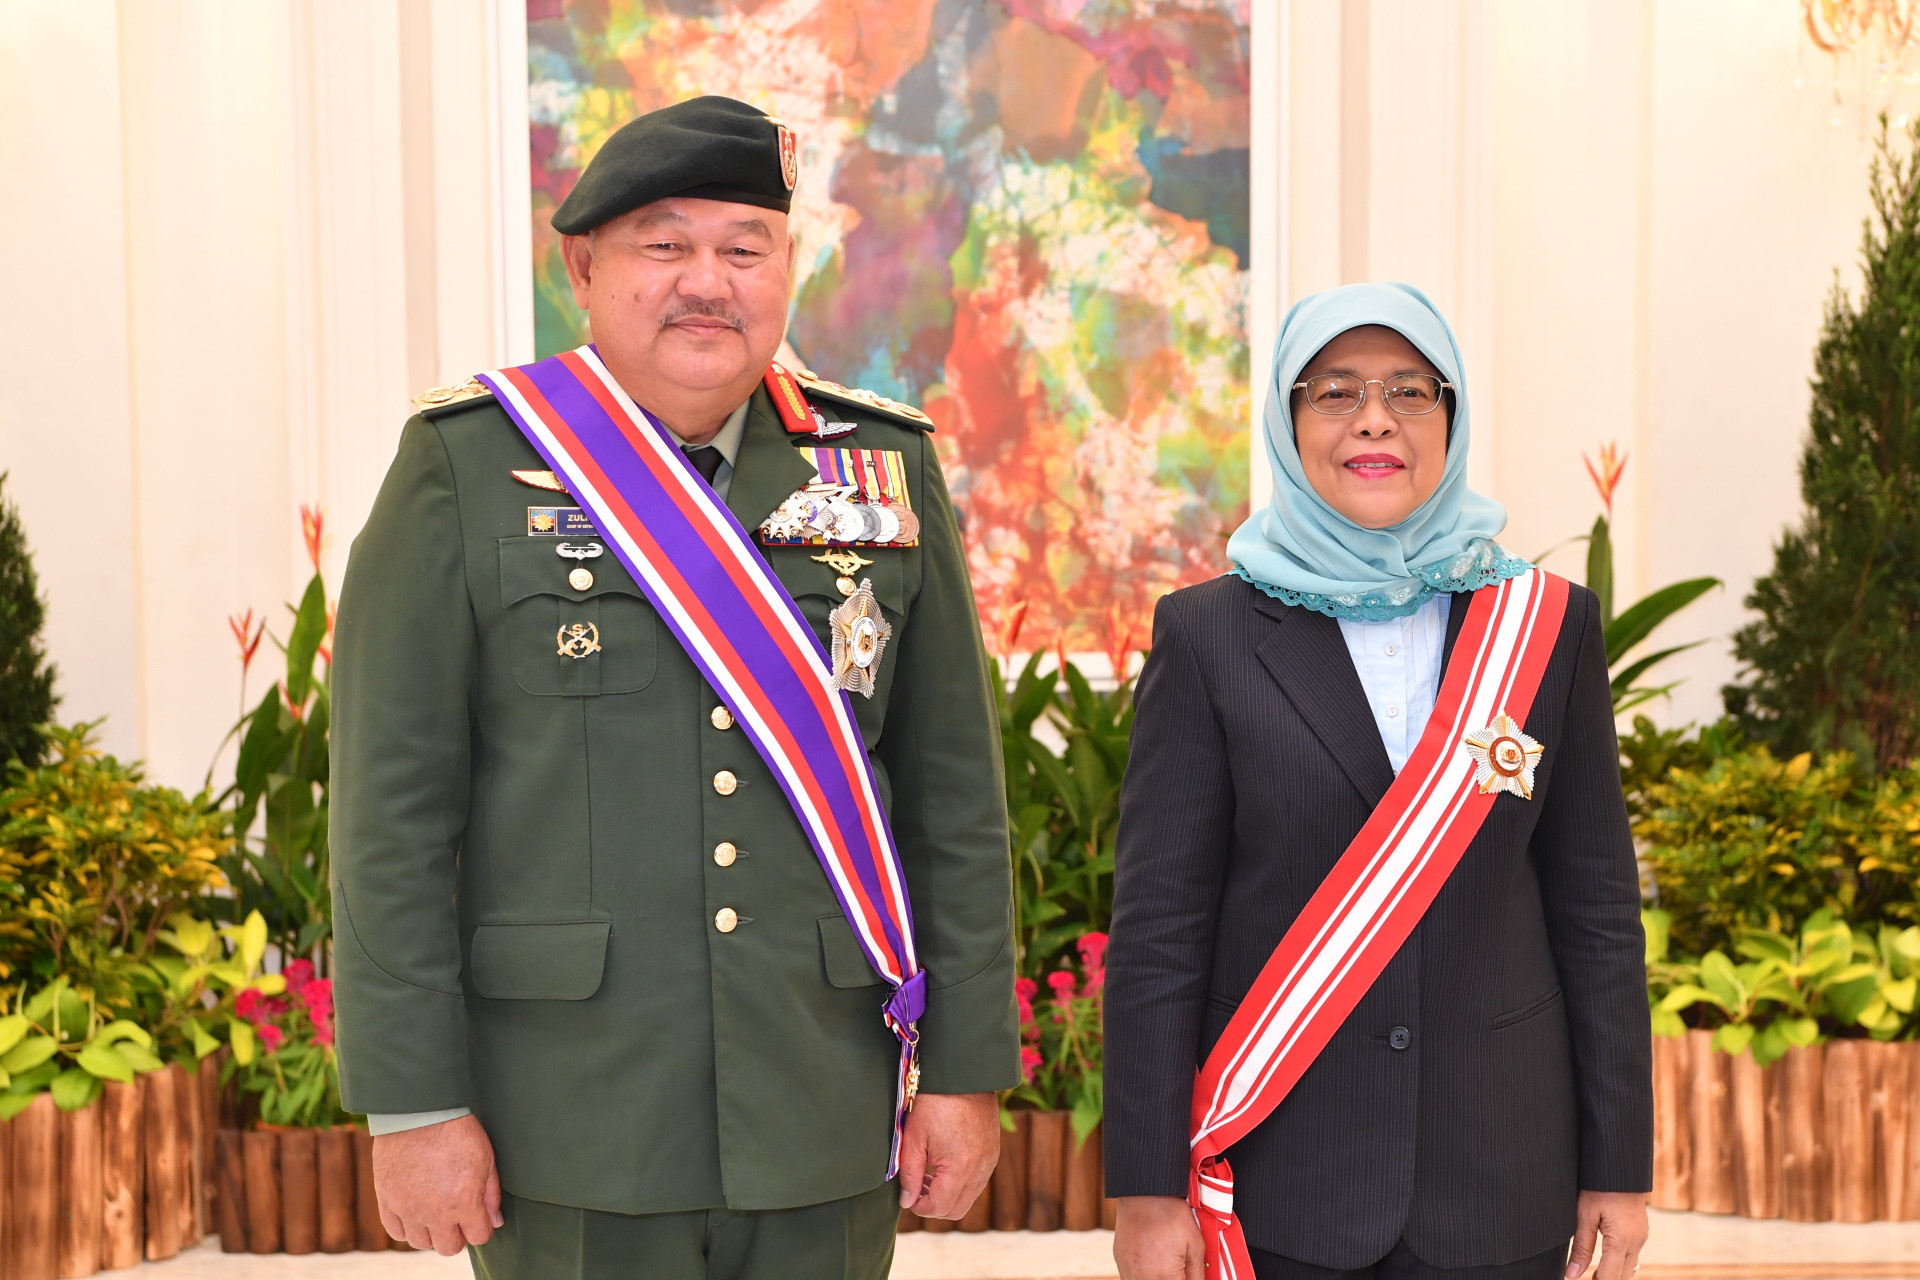 Top Military Award Conferred On Former Chief Of The Malaysian Armed Forces